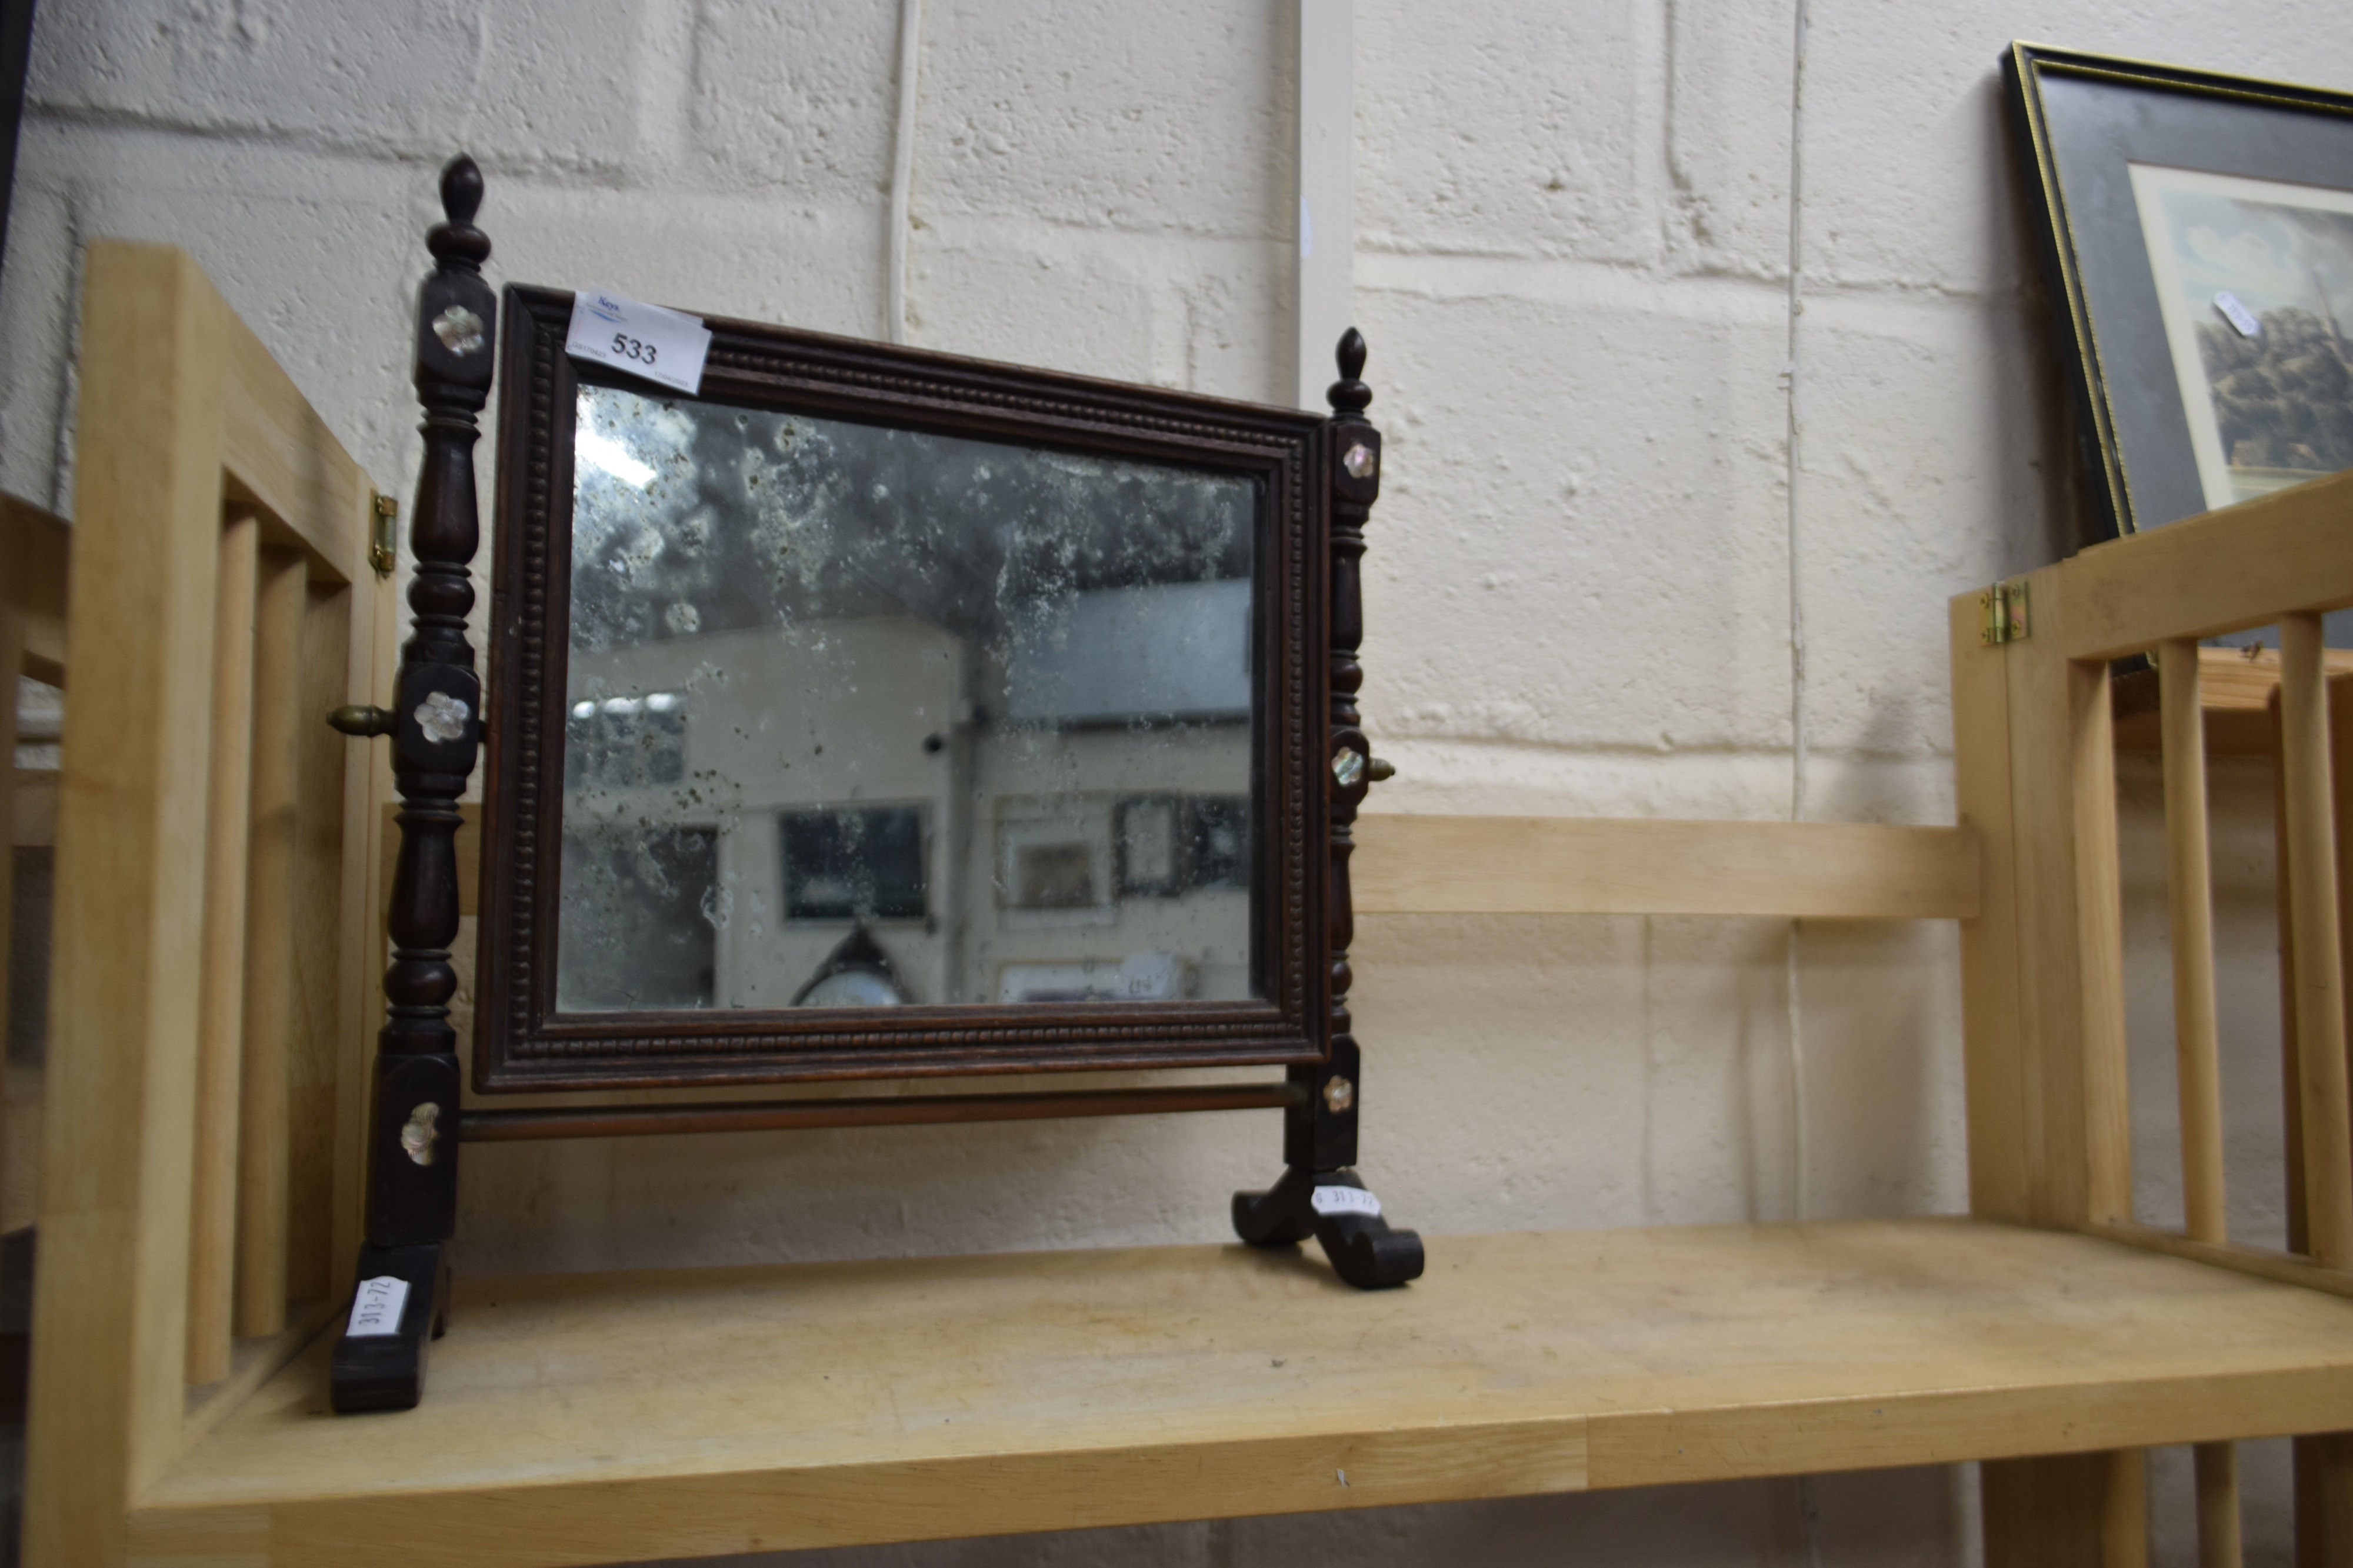 Dressing table mirror with mother of pearl decorative inlay